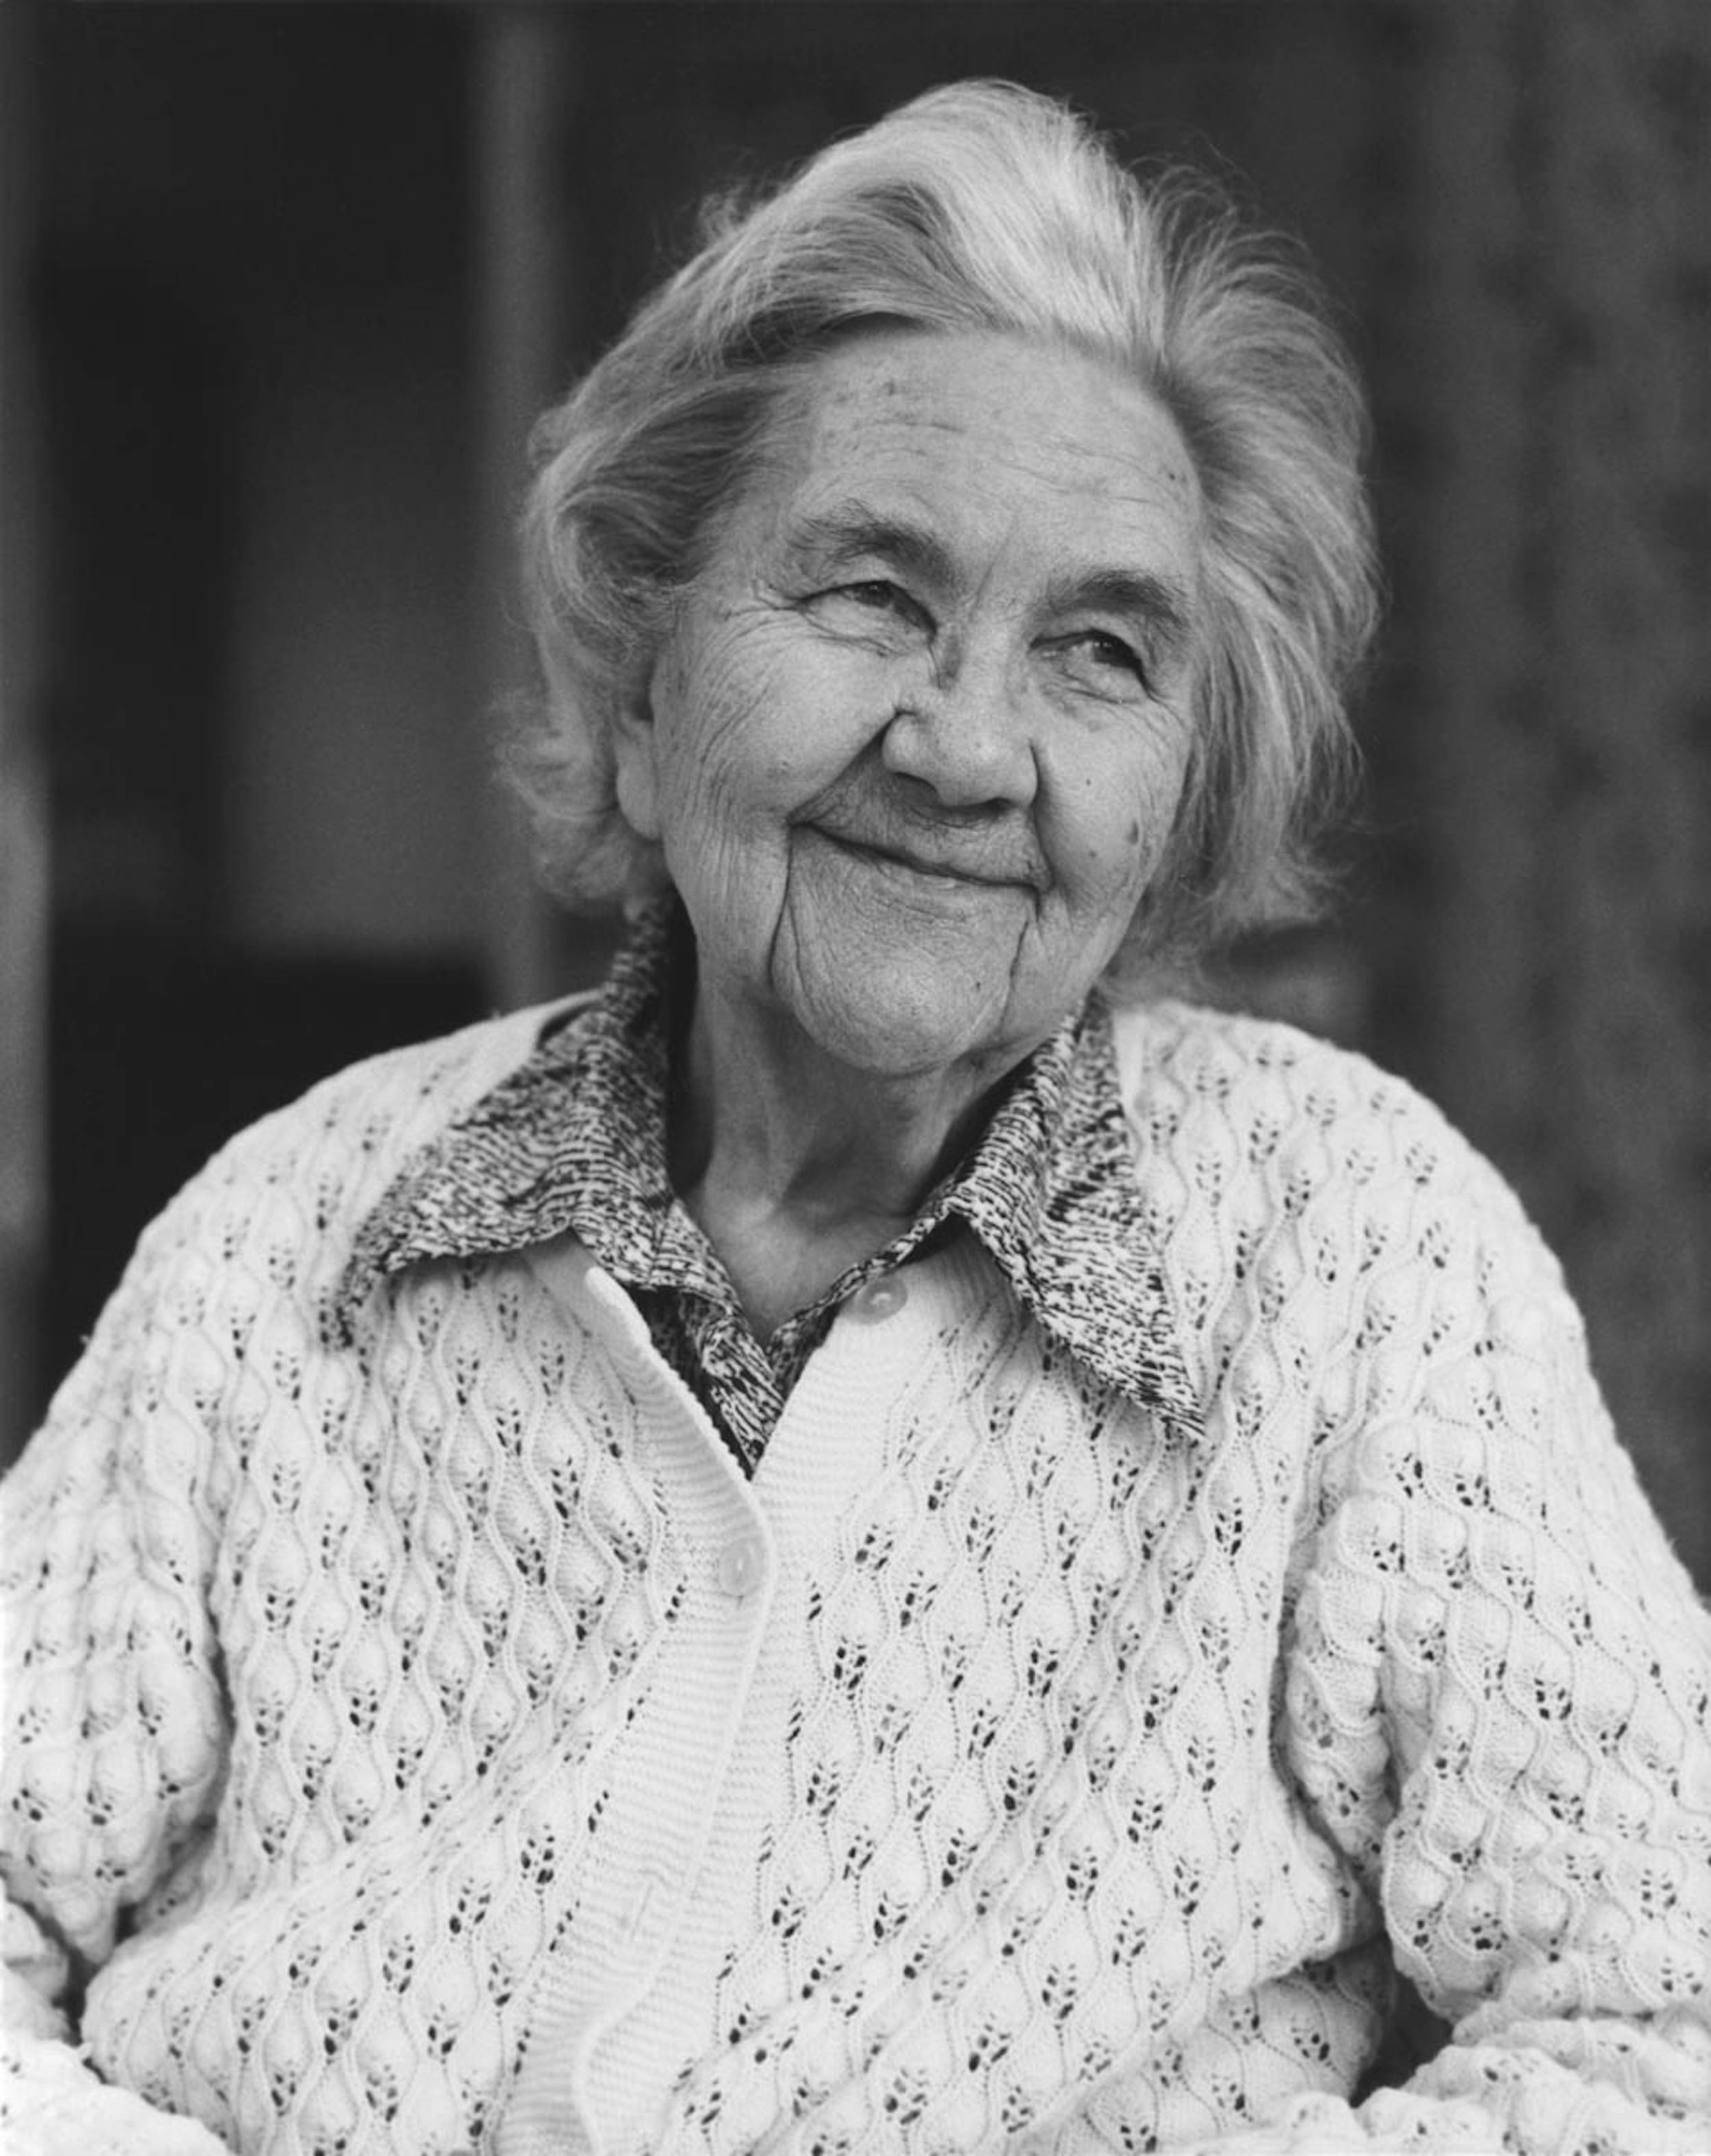 Black and white photo of elderly woman smiling and glancing off to the side.